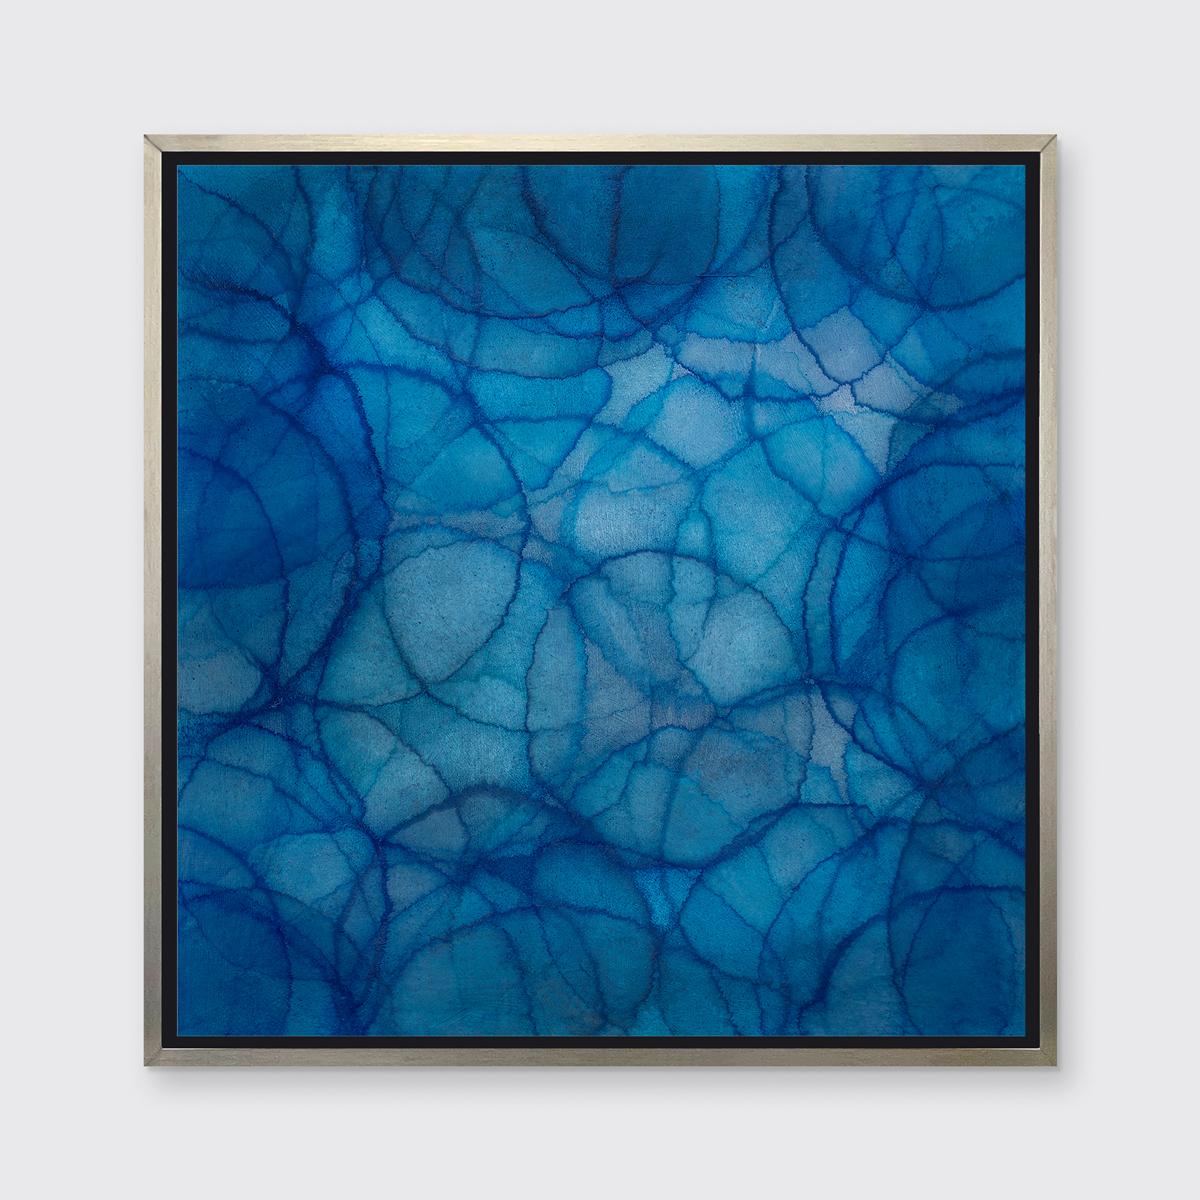 This Limited Edition giclee print by Roger Mudre features features a cool-toned palette with an iridescent quality. Circles with light outlines overlap one another in varying blue, green, white shades to create a larger blue circular form at the